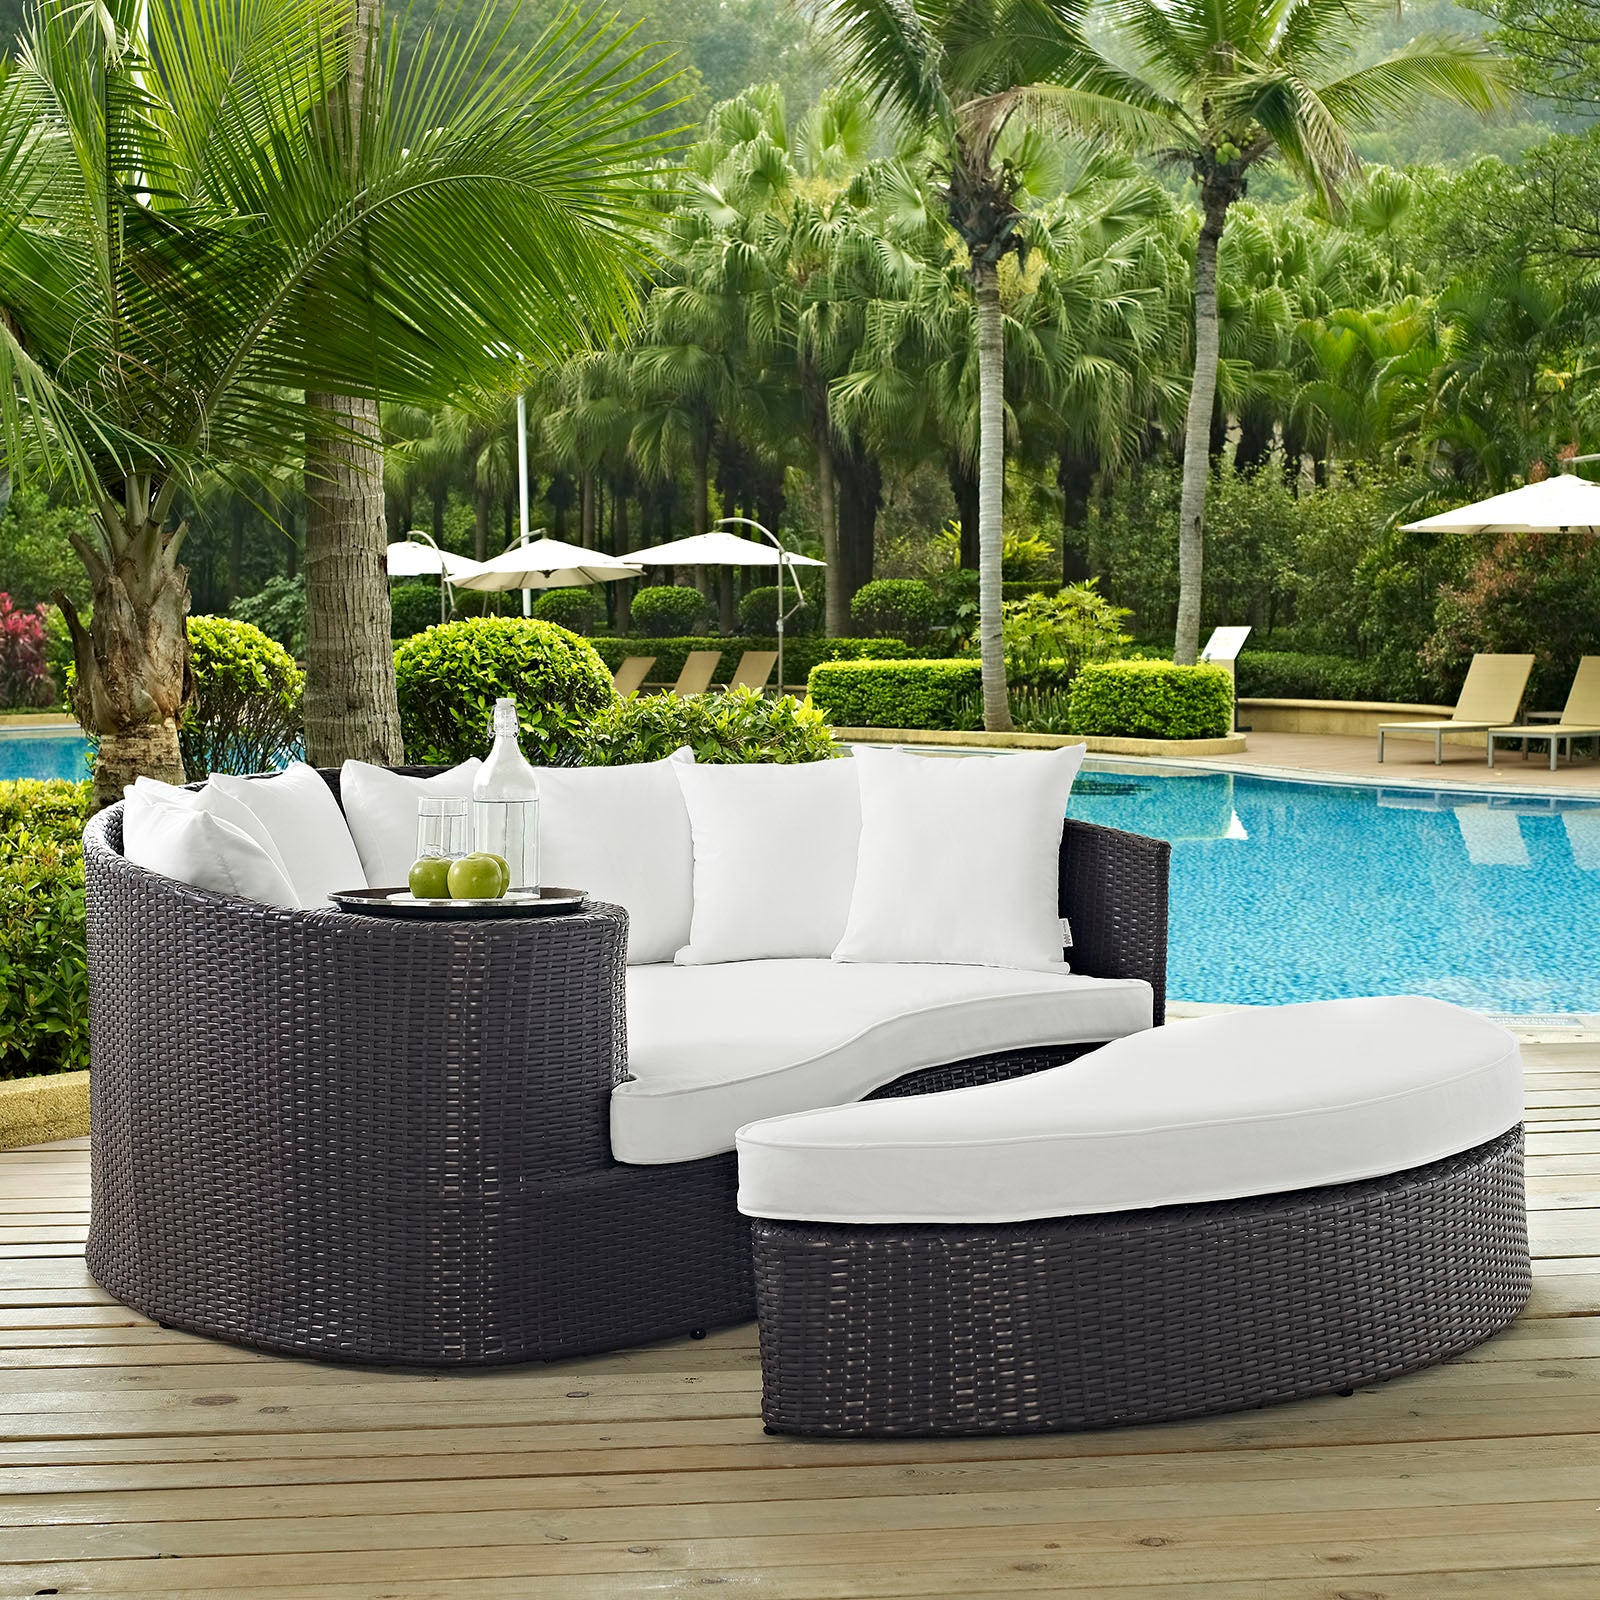 Modway Patio Daybeds - Convene Outdoor Patio Daybed Espresso White